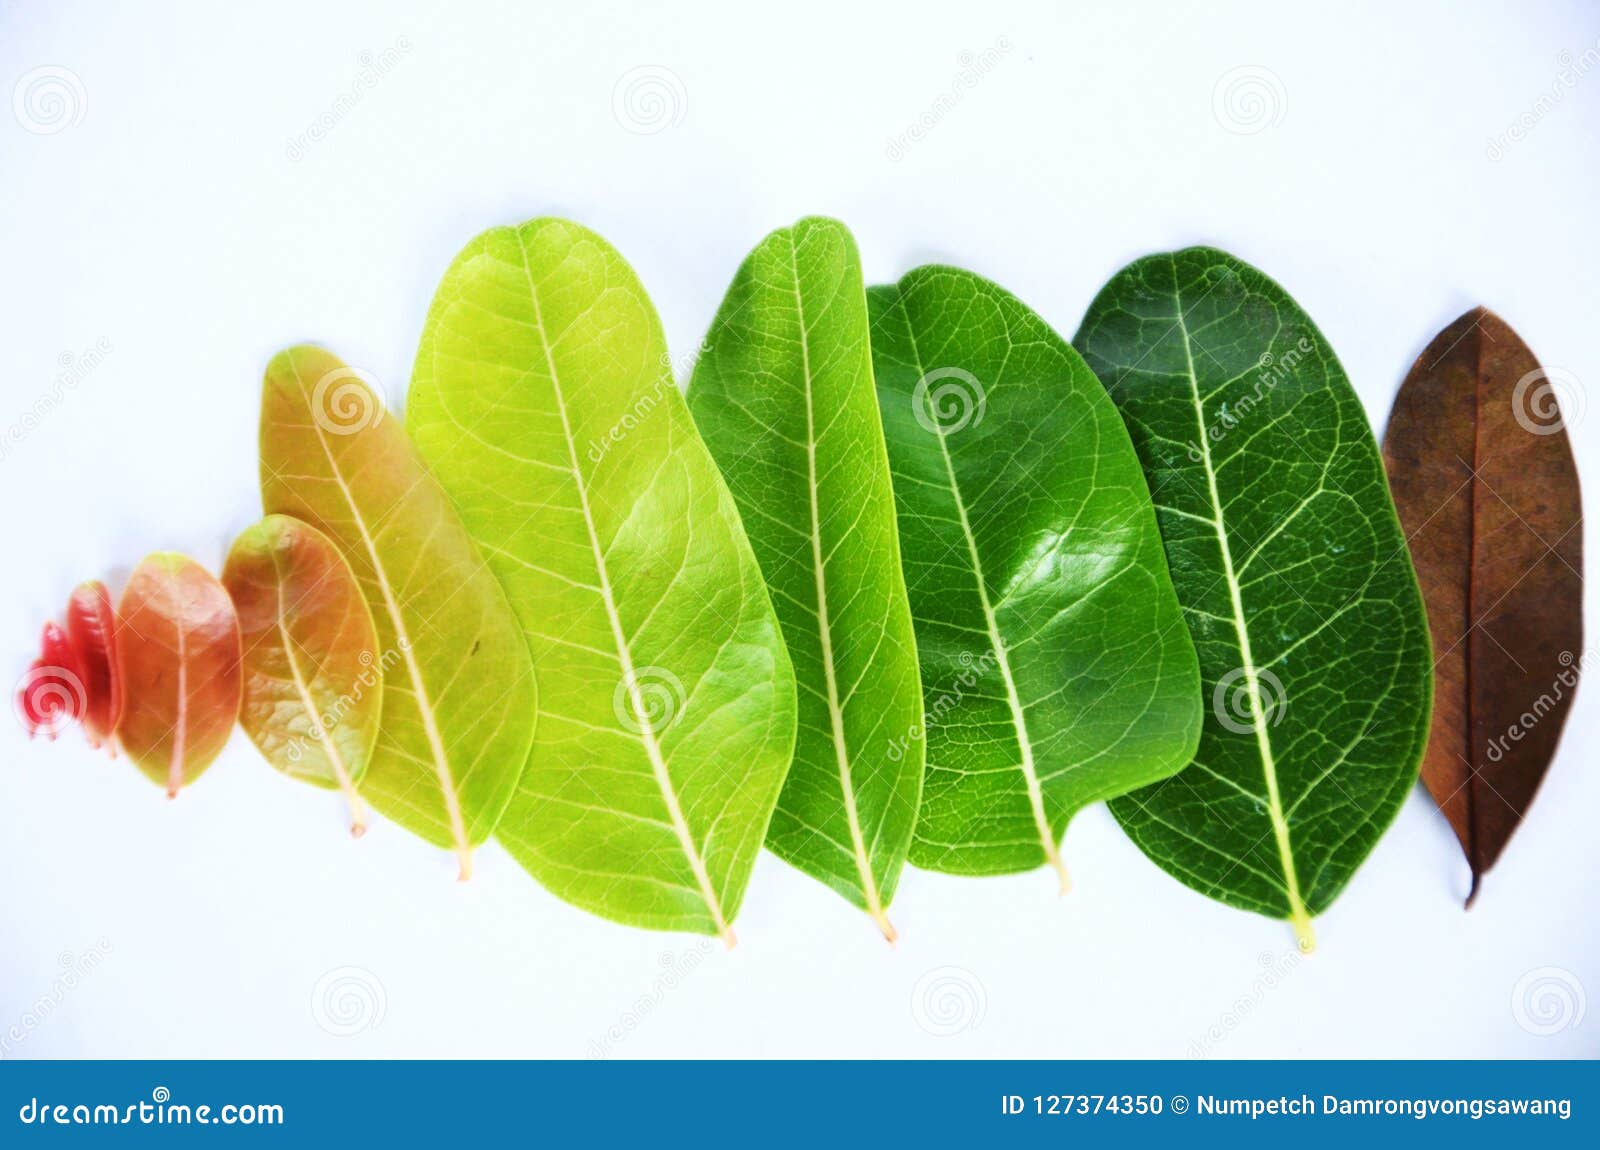 What Shade of Green are Leaves 